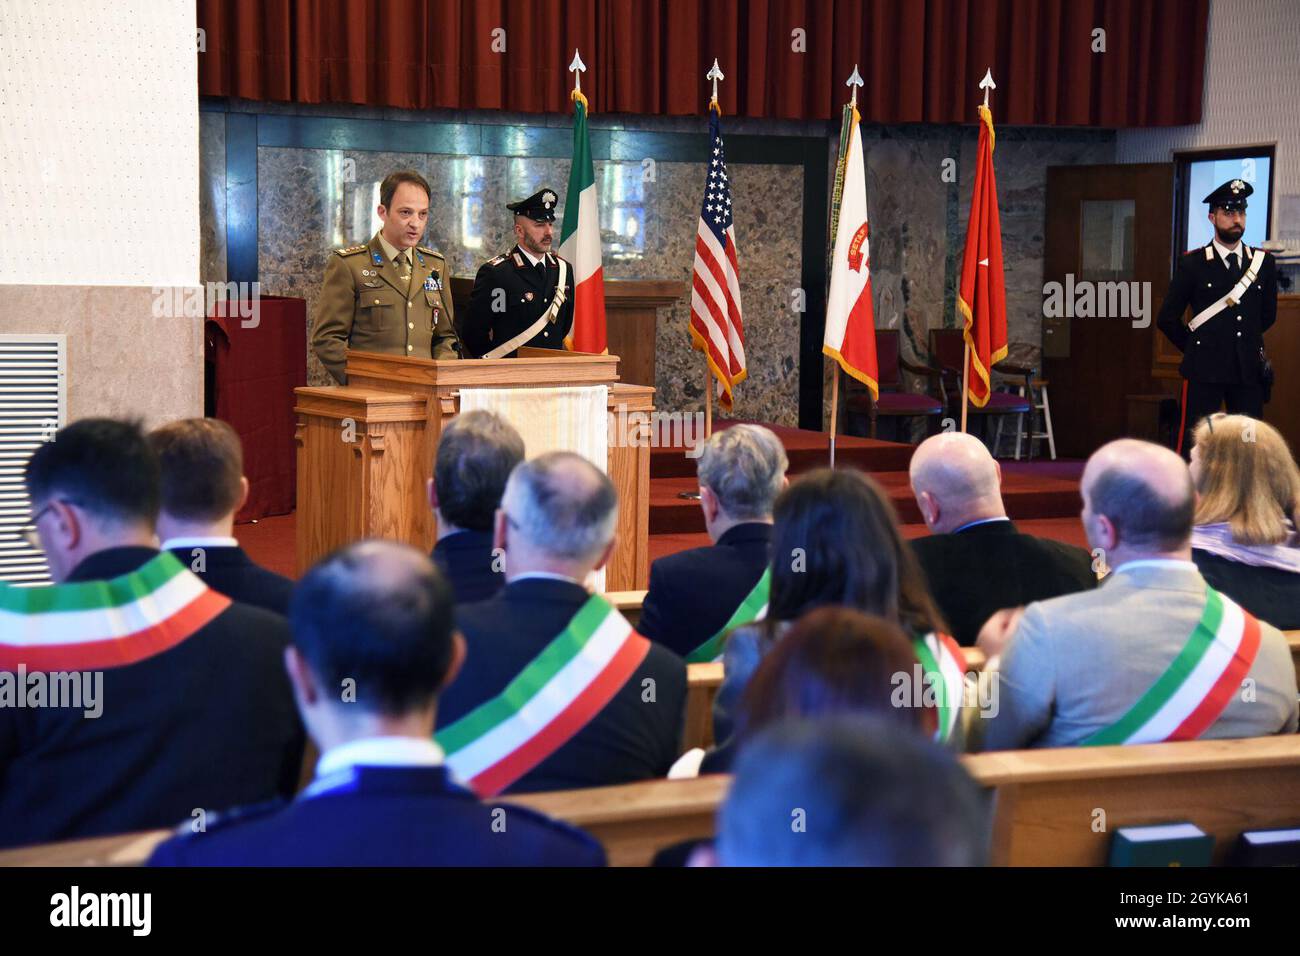 Italian Army Col. Umberto D’Andria, outgoing Deputy Chief of Staff of United States Army Africa and Senior Italian Officer, delivers his remarks during the Italian Base designation of responsibility ceremony at Caserma C. Ederle in Vicenza, Italy, January 16, 2020. (U.S. Army Photos by Paolo Bovo) Stock Photo